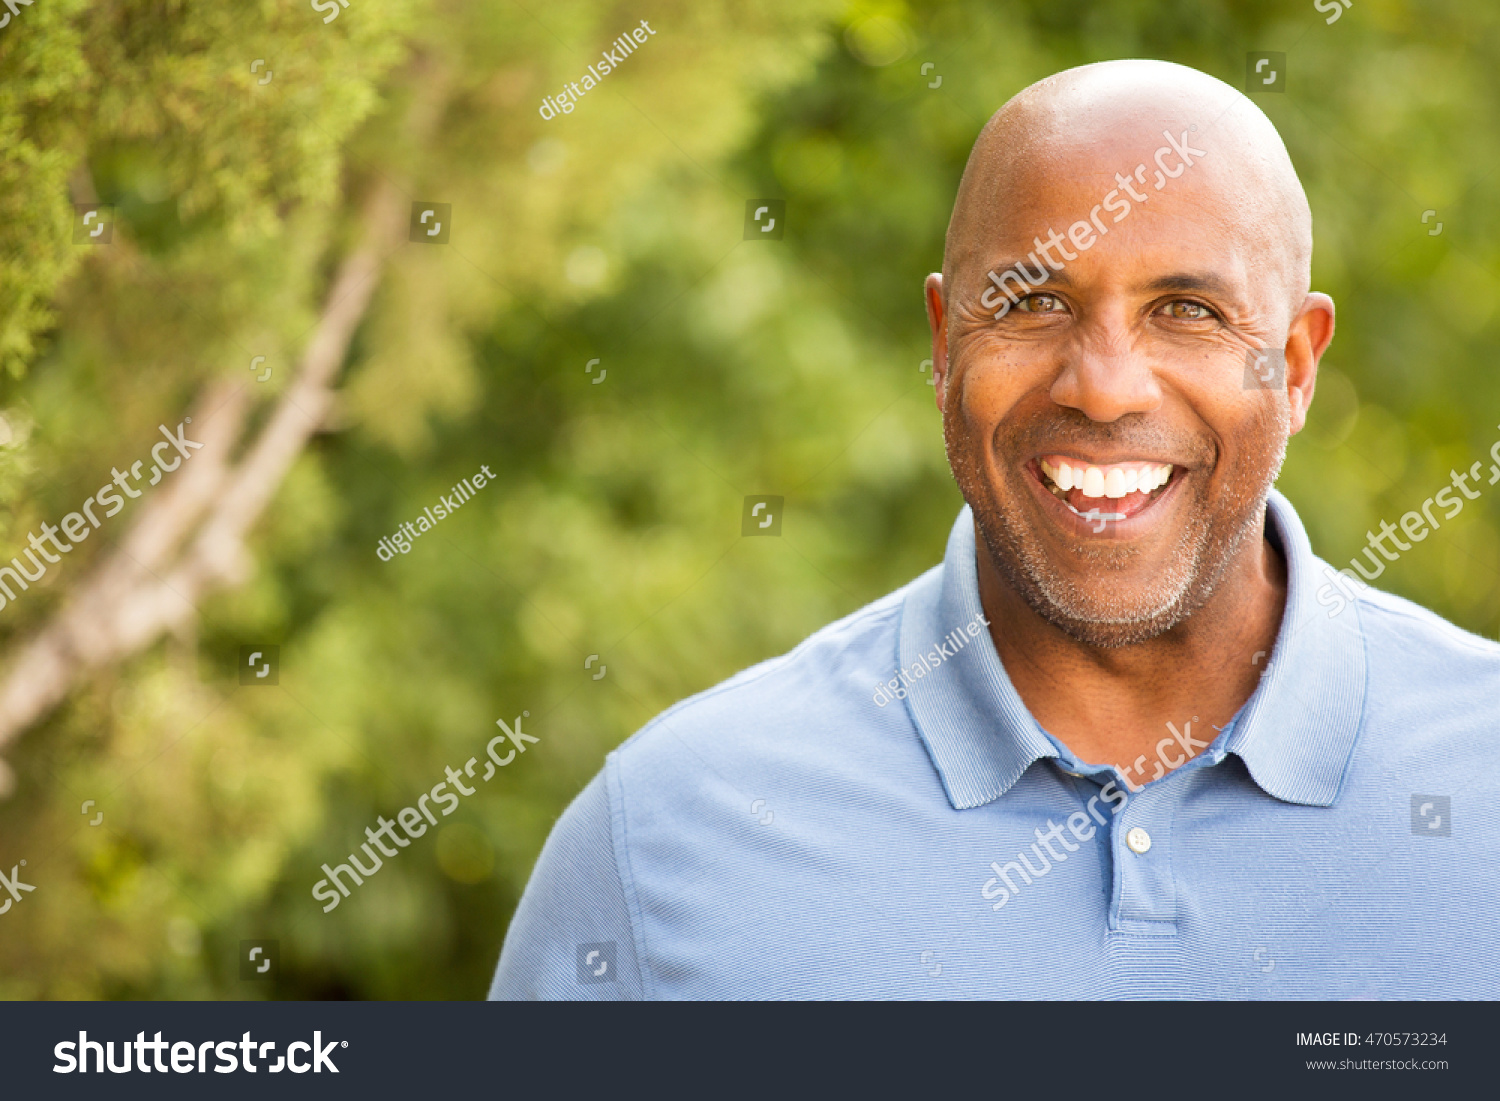 Portrait of an African American Man Outdoors #470573234